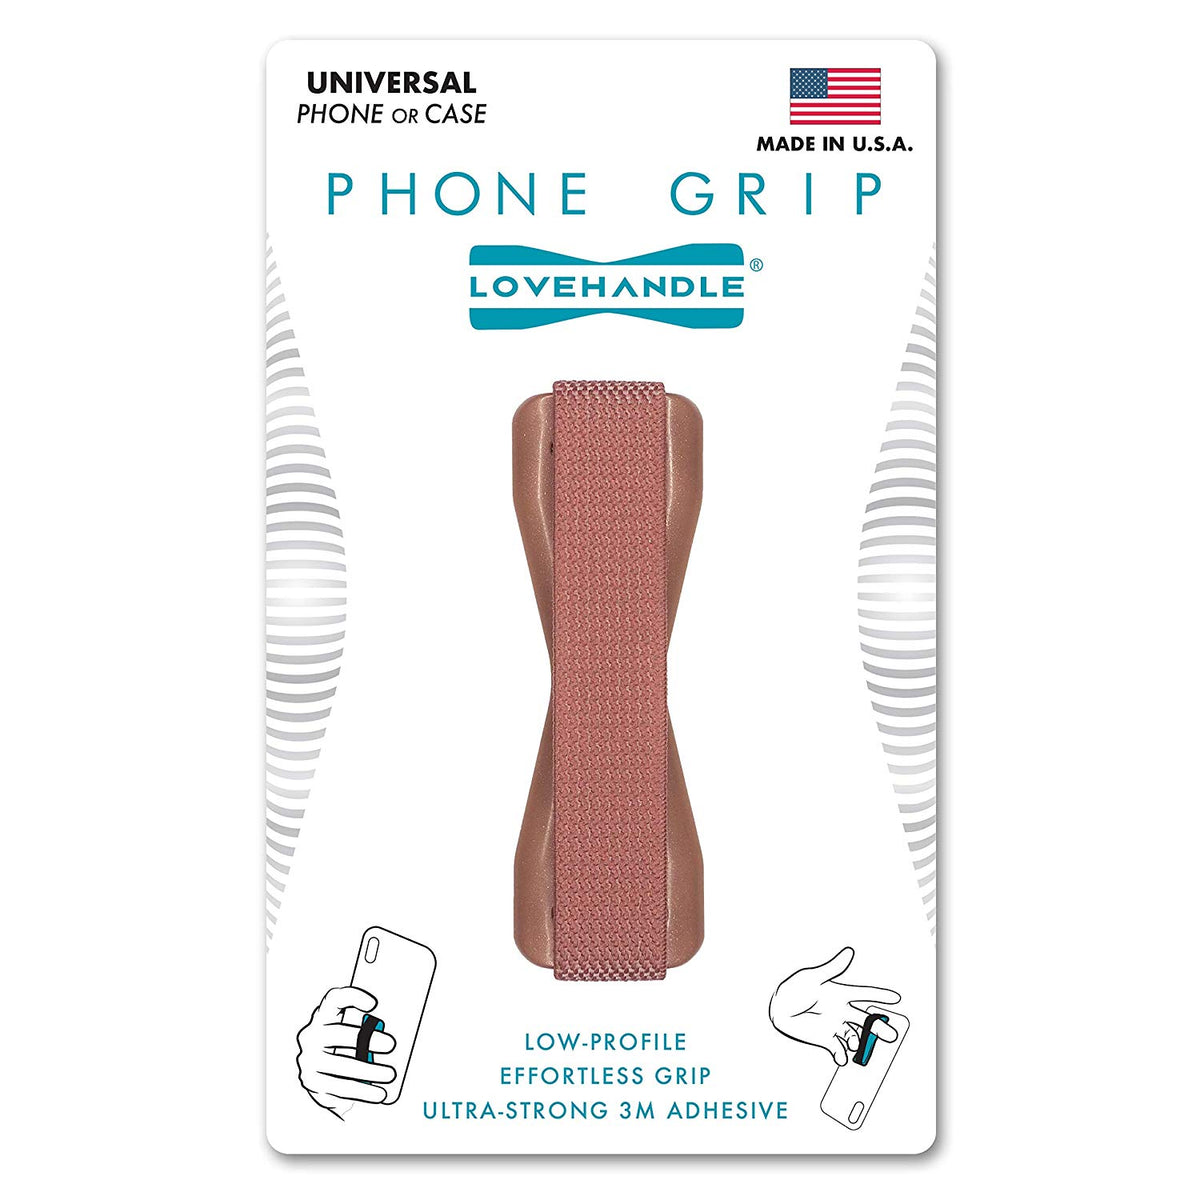 Solid Silver Phone Grip by LoveHandle - A Universal Grip for Most